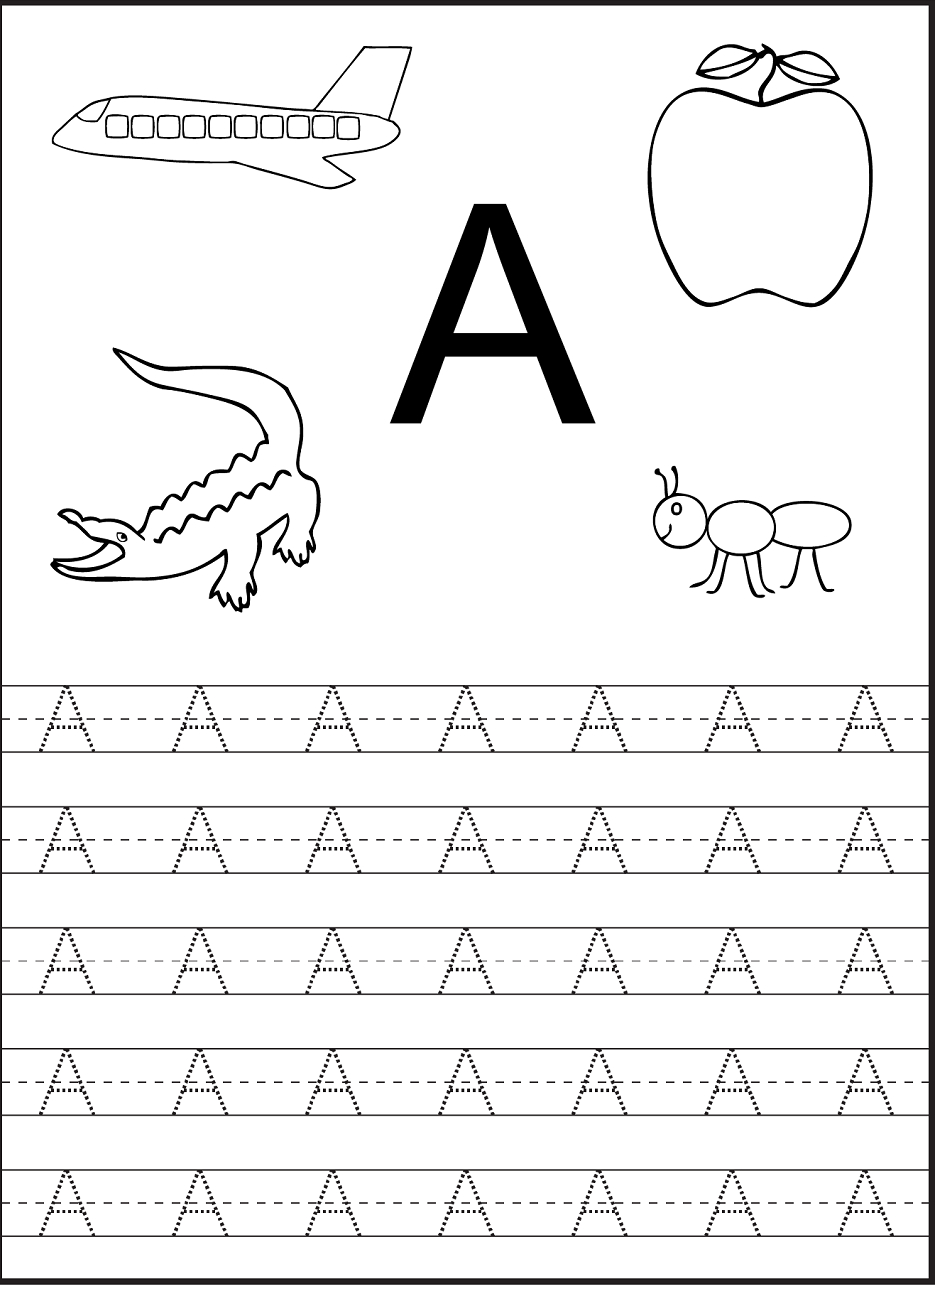 Tracing The Letter A Free Printable | Preschool Worksheets intended for Letter Tracing Activity Worksheets